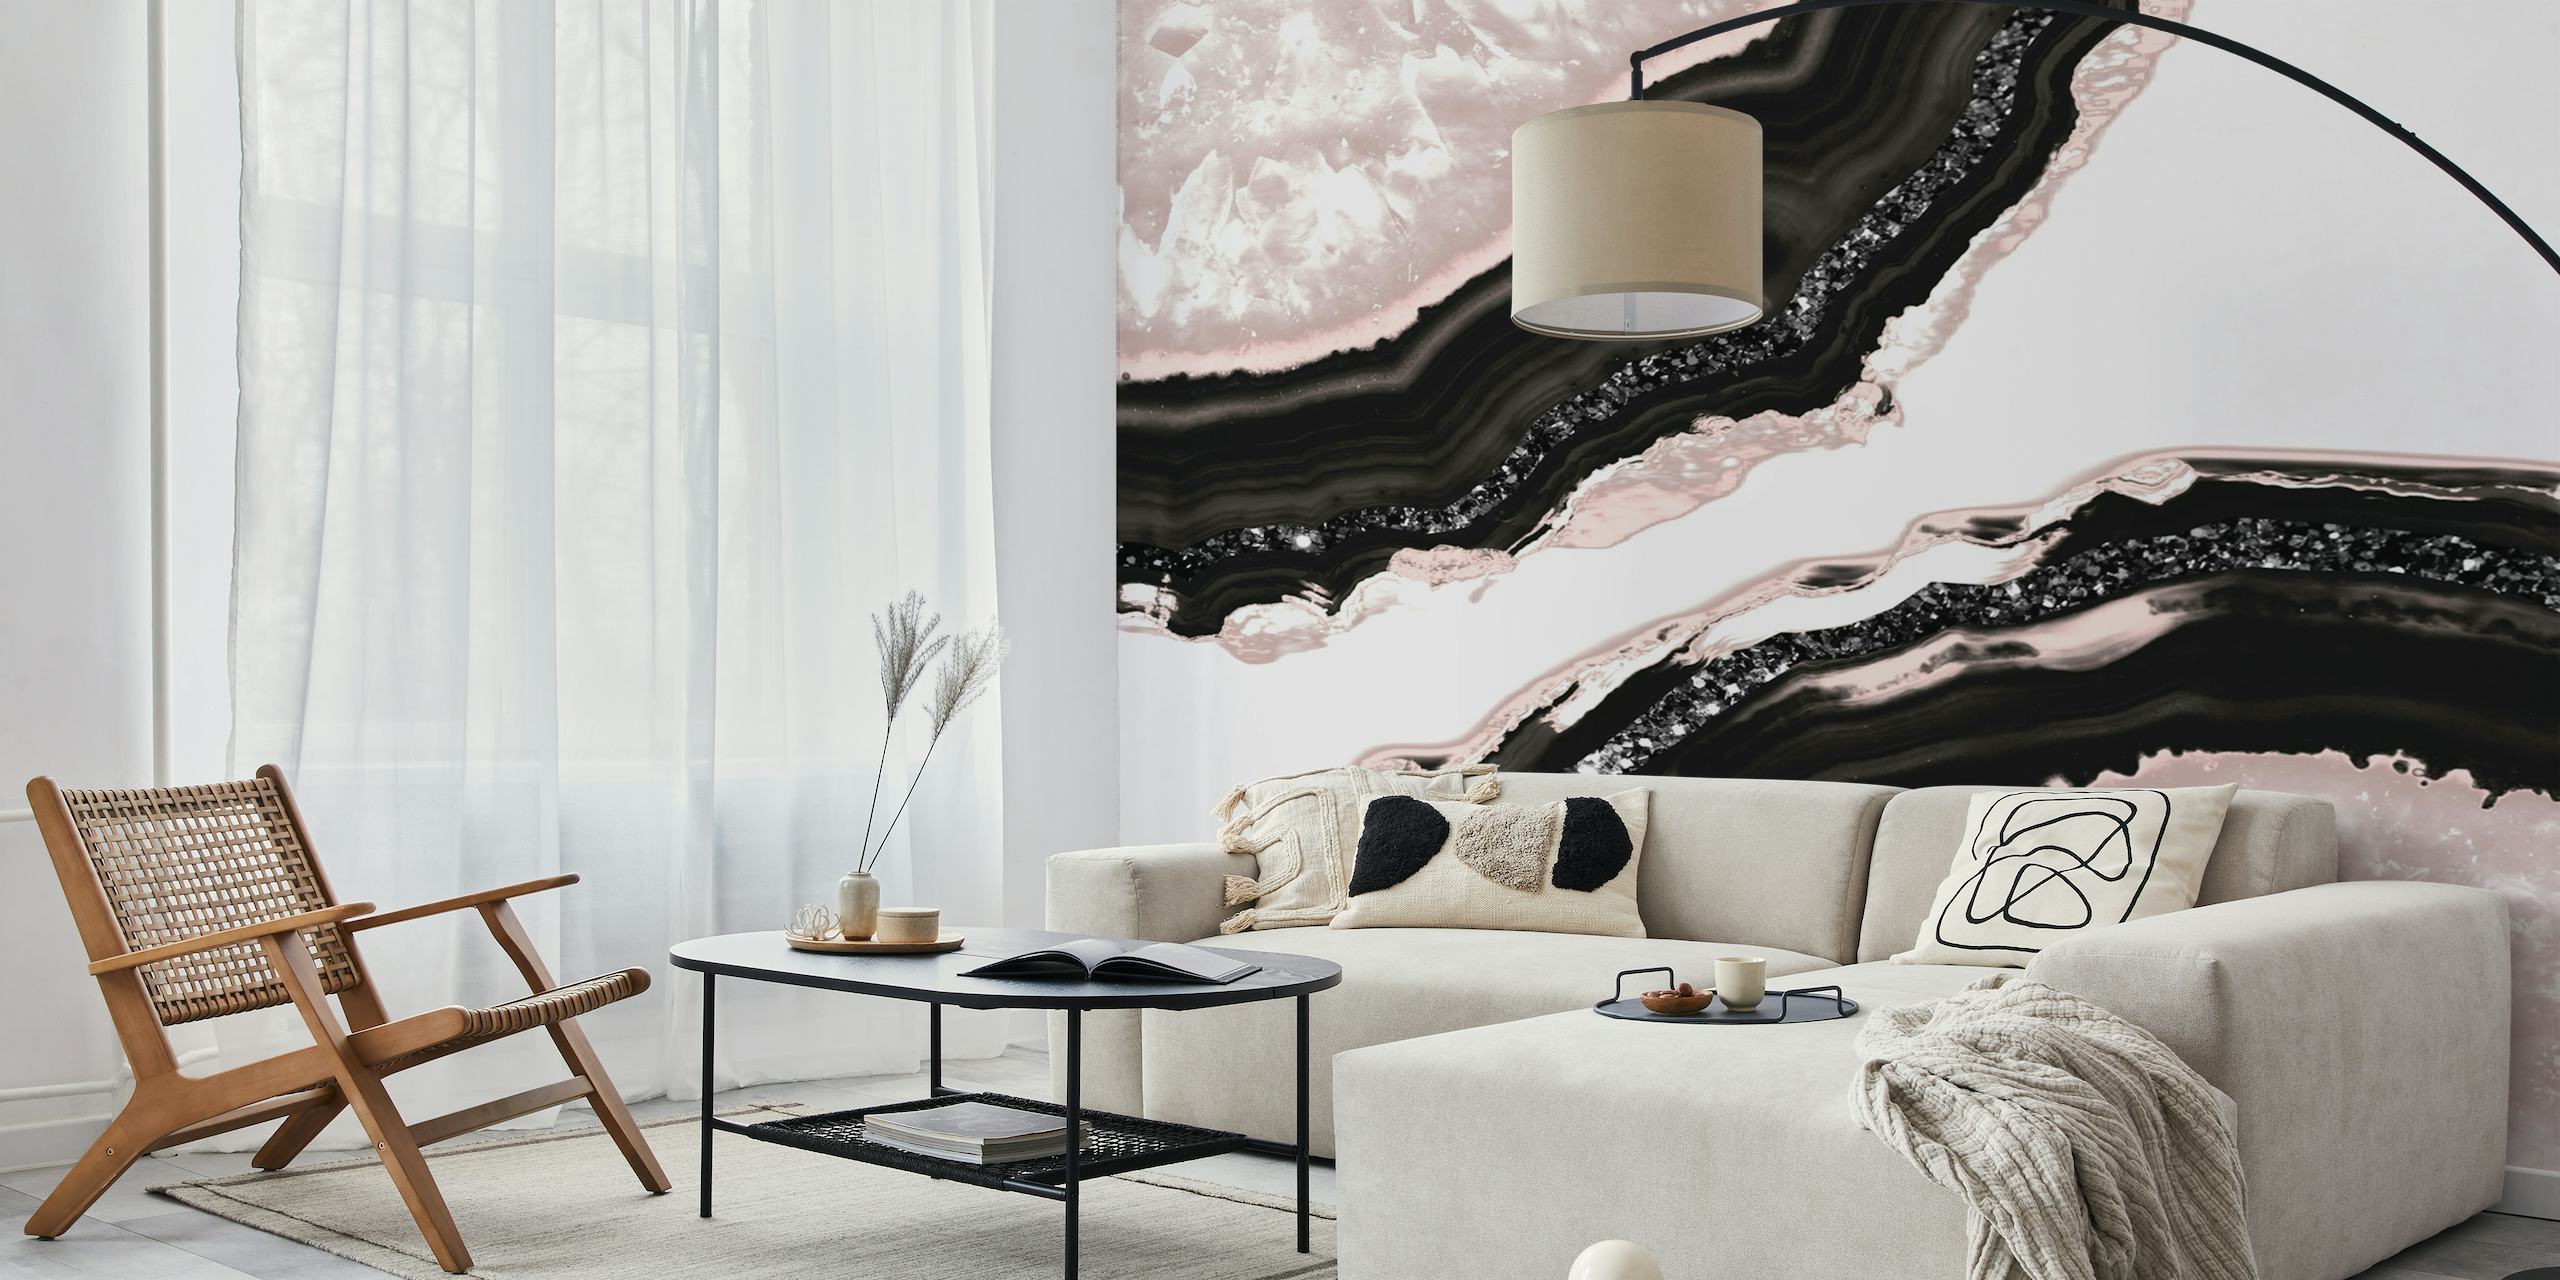 Stylish agate-inspired wall mural with black, white, and soft pink patterns and glitter accents